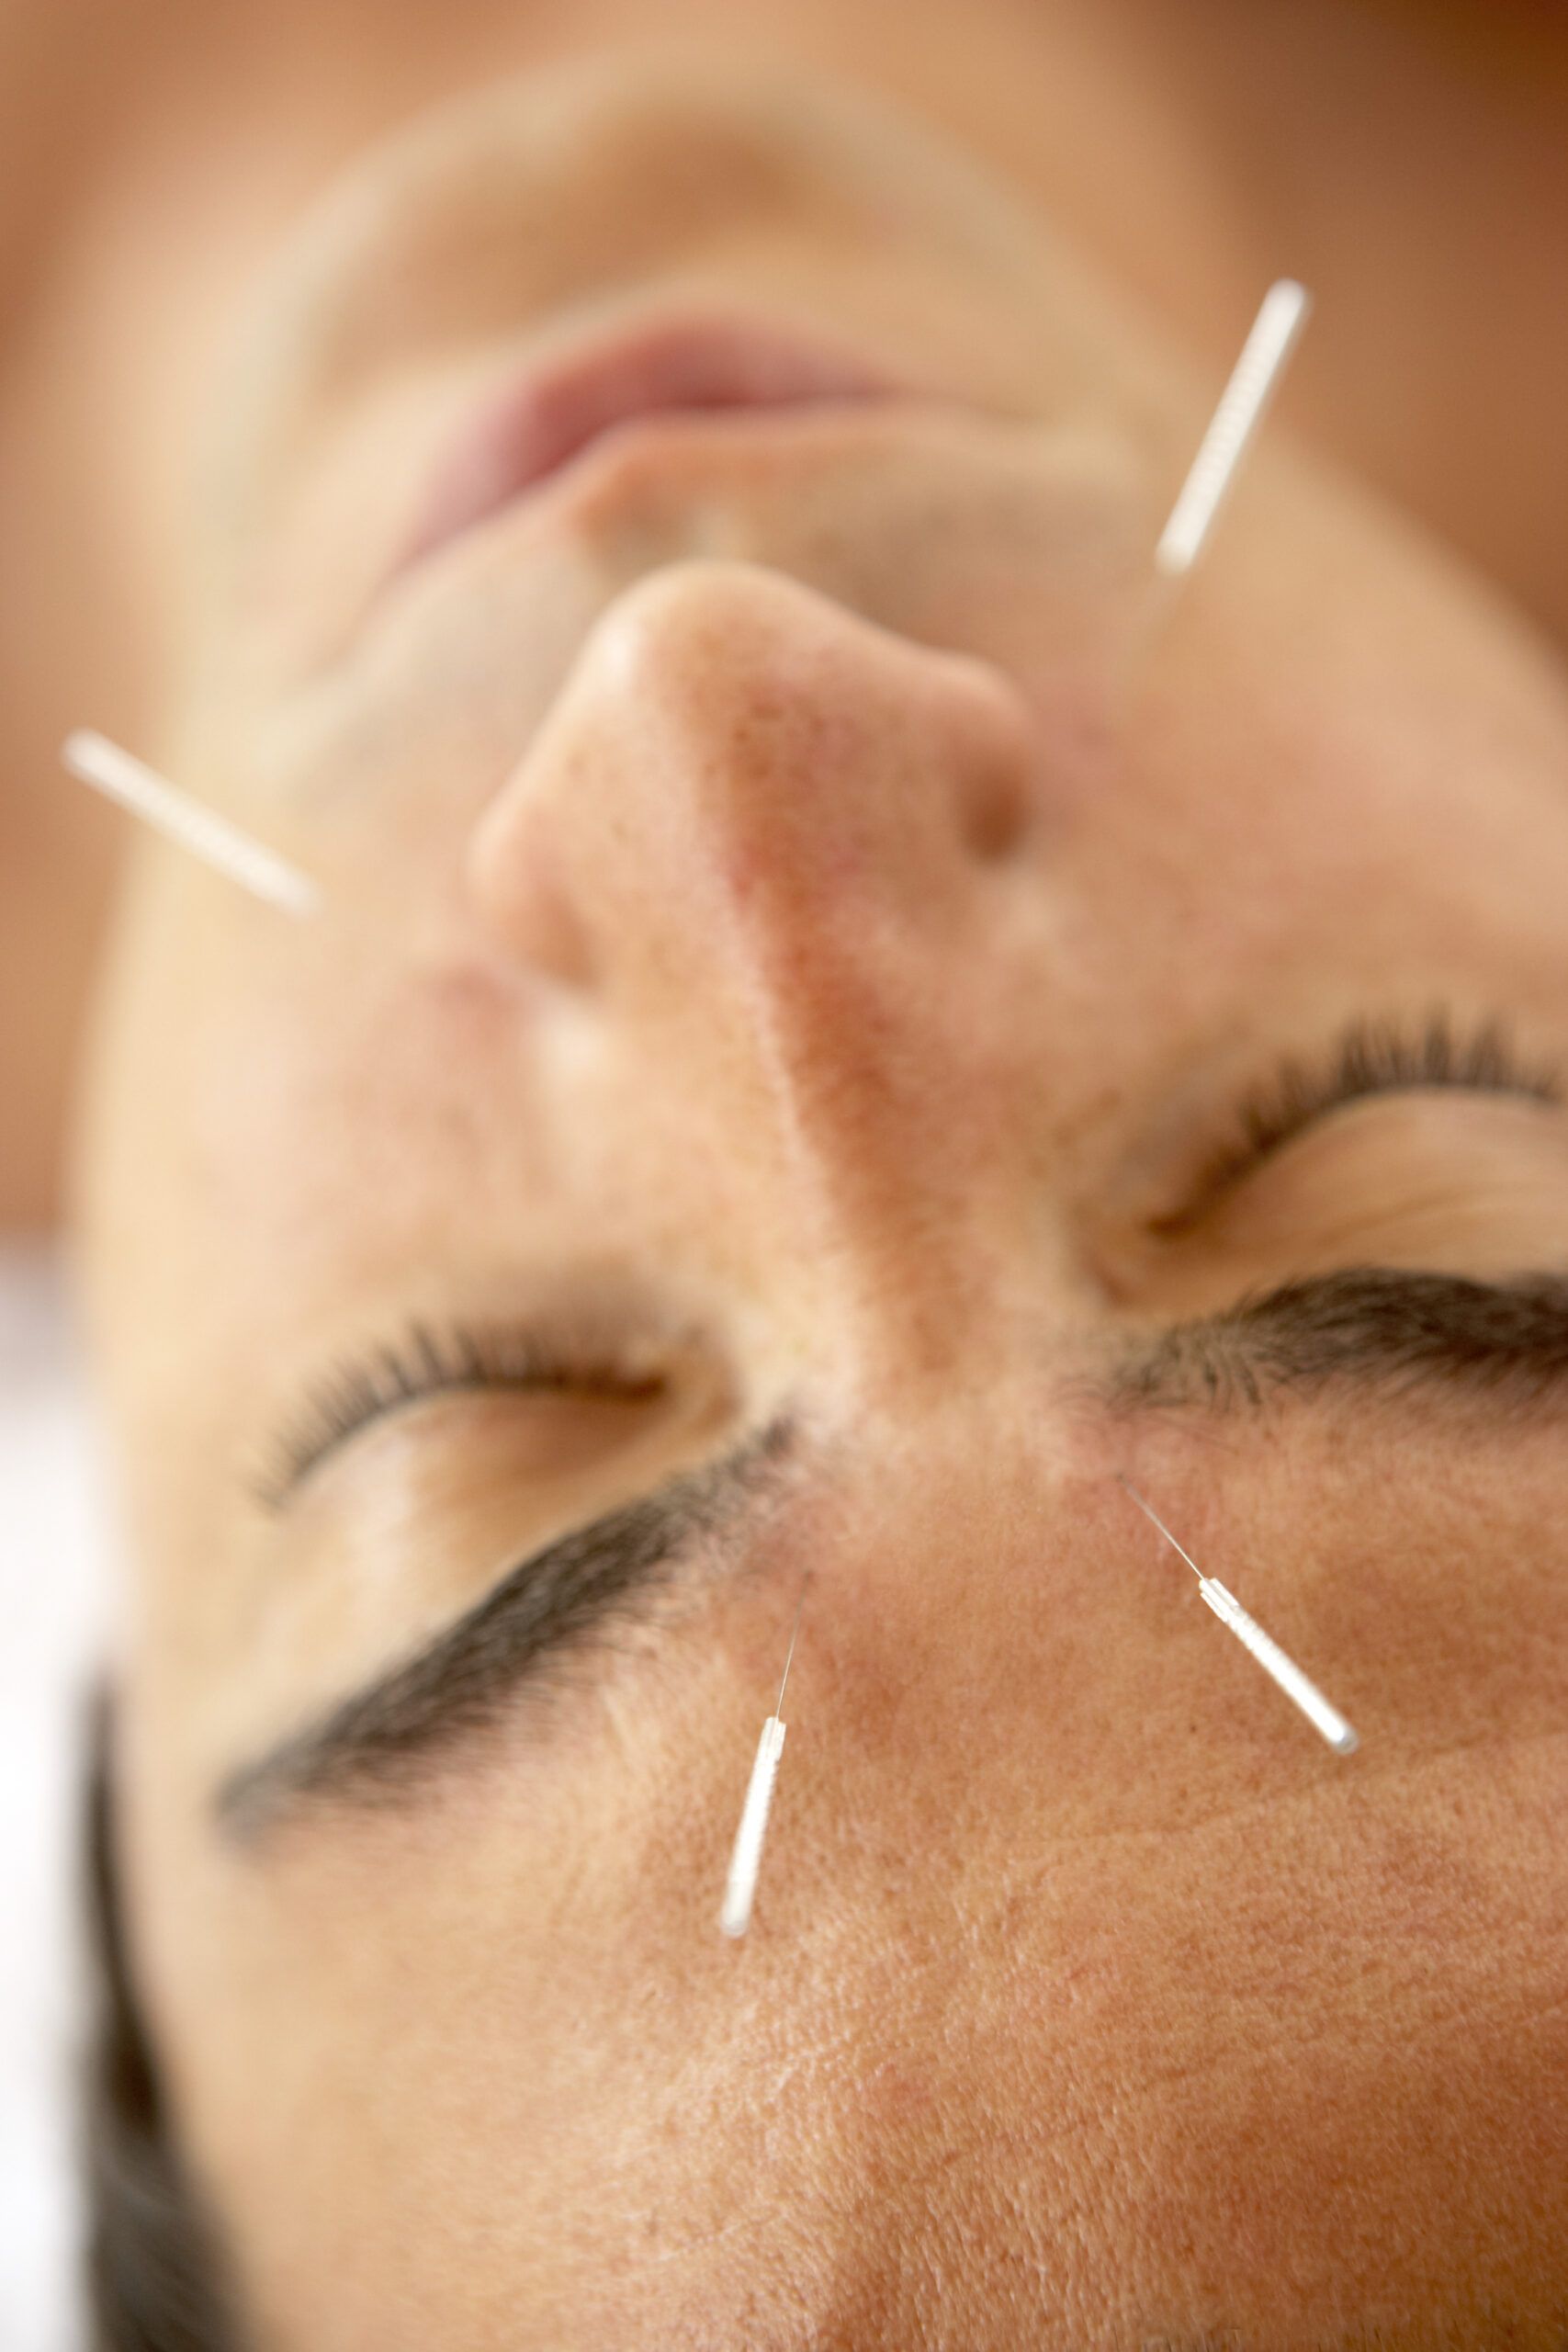 A person with several acupuncture needles in their face